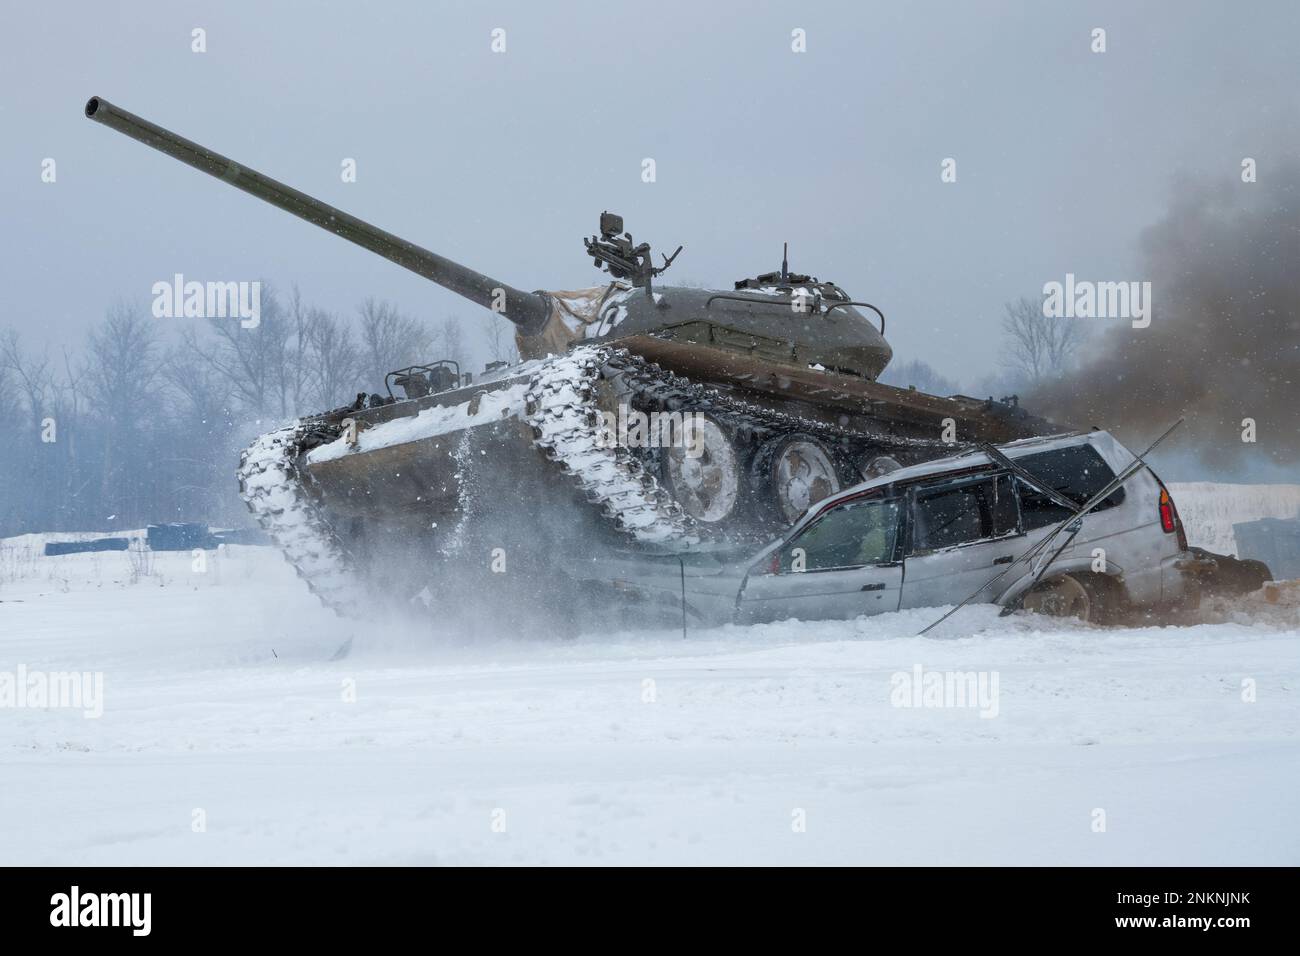 KRASNOYE SELO, RUSSIA - FEBRUARY 19, 2023: A Soviet tank T-54 crushes a old passenger car in a snowy field. Tank show in the military historical park Stock Photo